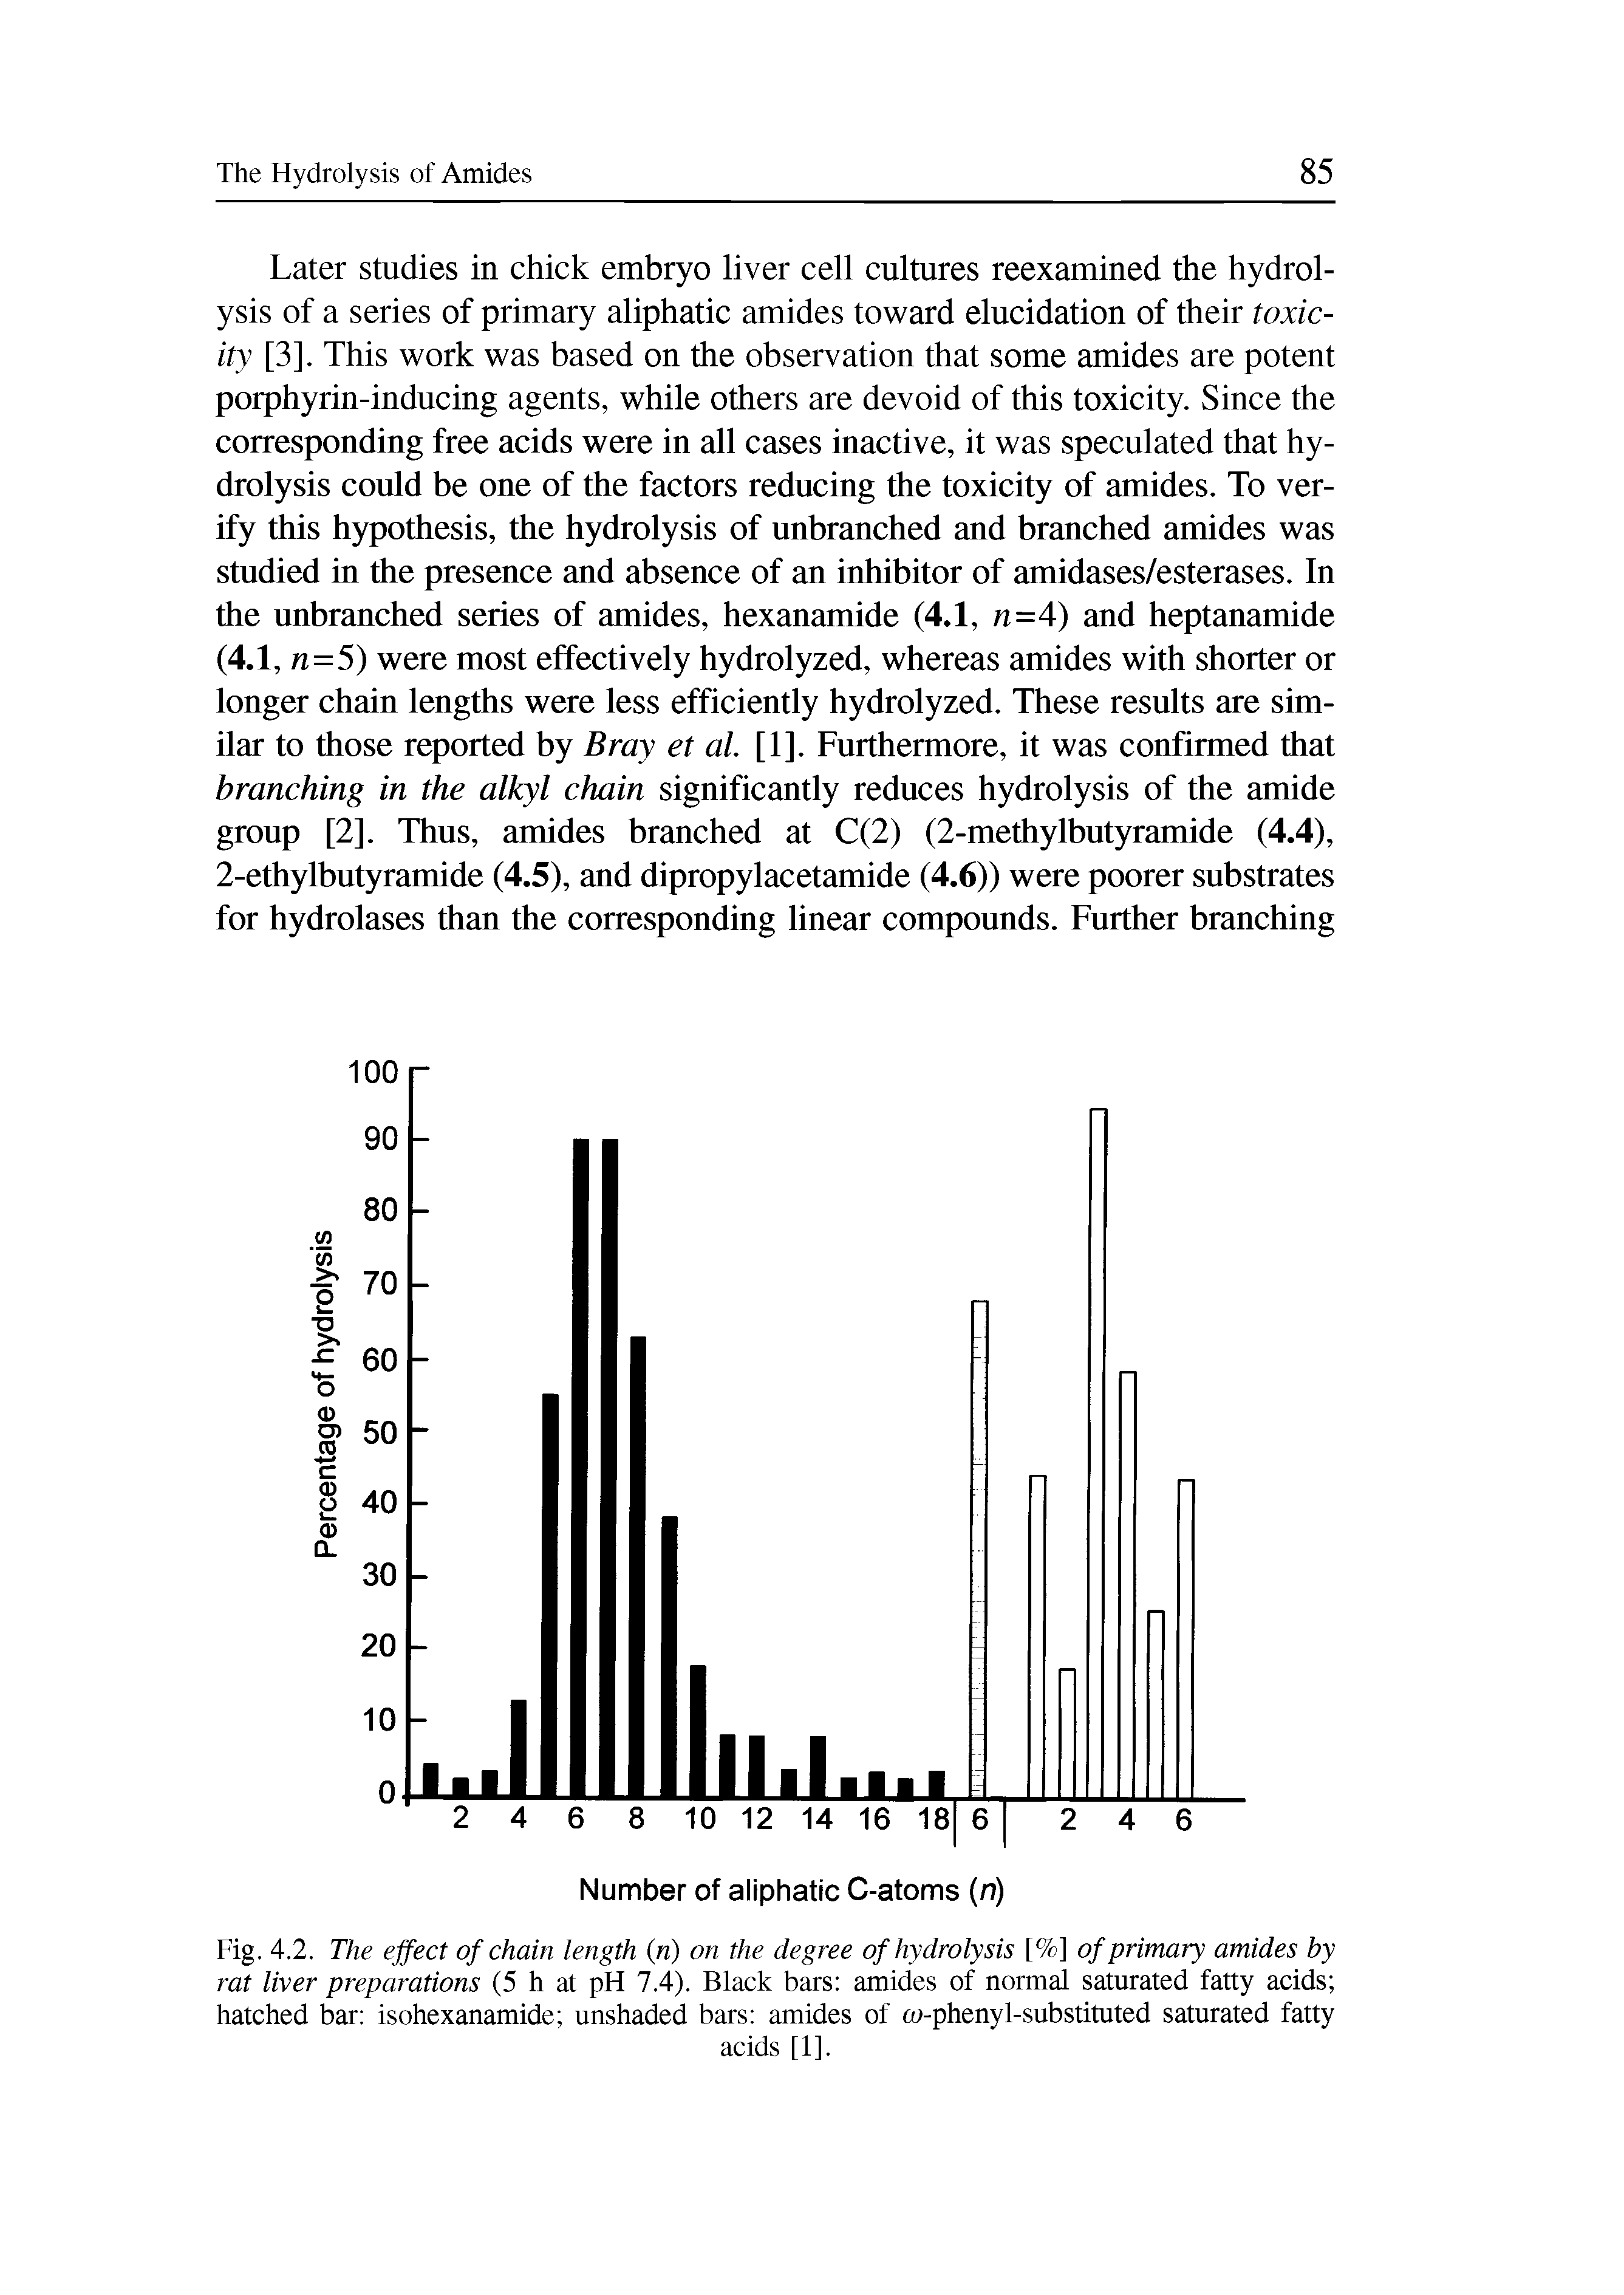 Fig. 4.2. The effect of chain length (li) on the degree of hydrolysis [%] of primary amides by rat liver preparations (5 h at pH 7.4). Black bars amides of normal saturated fatty acids hatched bar isohexanamide unshaded bars amides of m-phenyl-substituted saturated fatty...